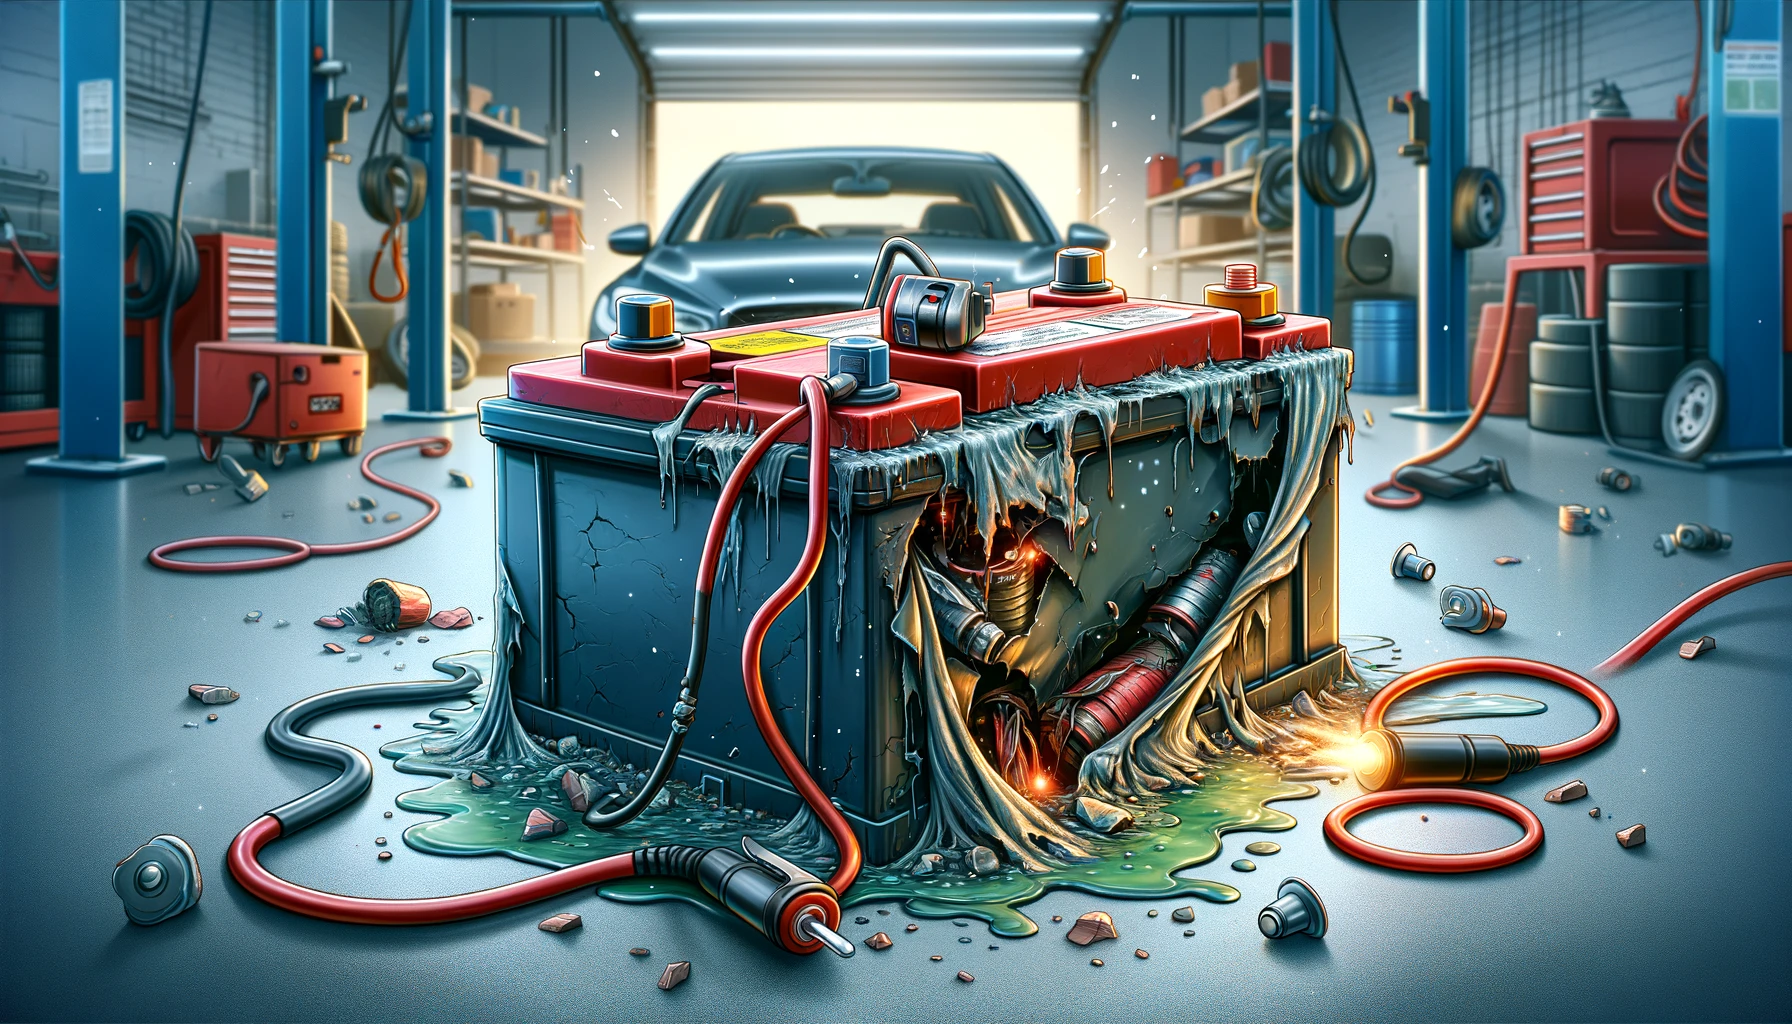 Digital illustration of an overcharged car battery showing signs of damage like bulging and leakage in a garage setting.